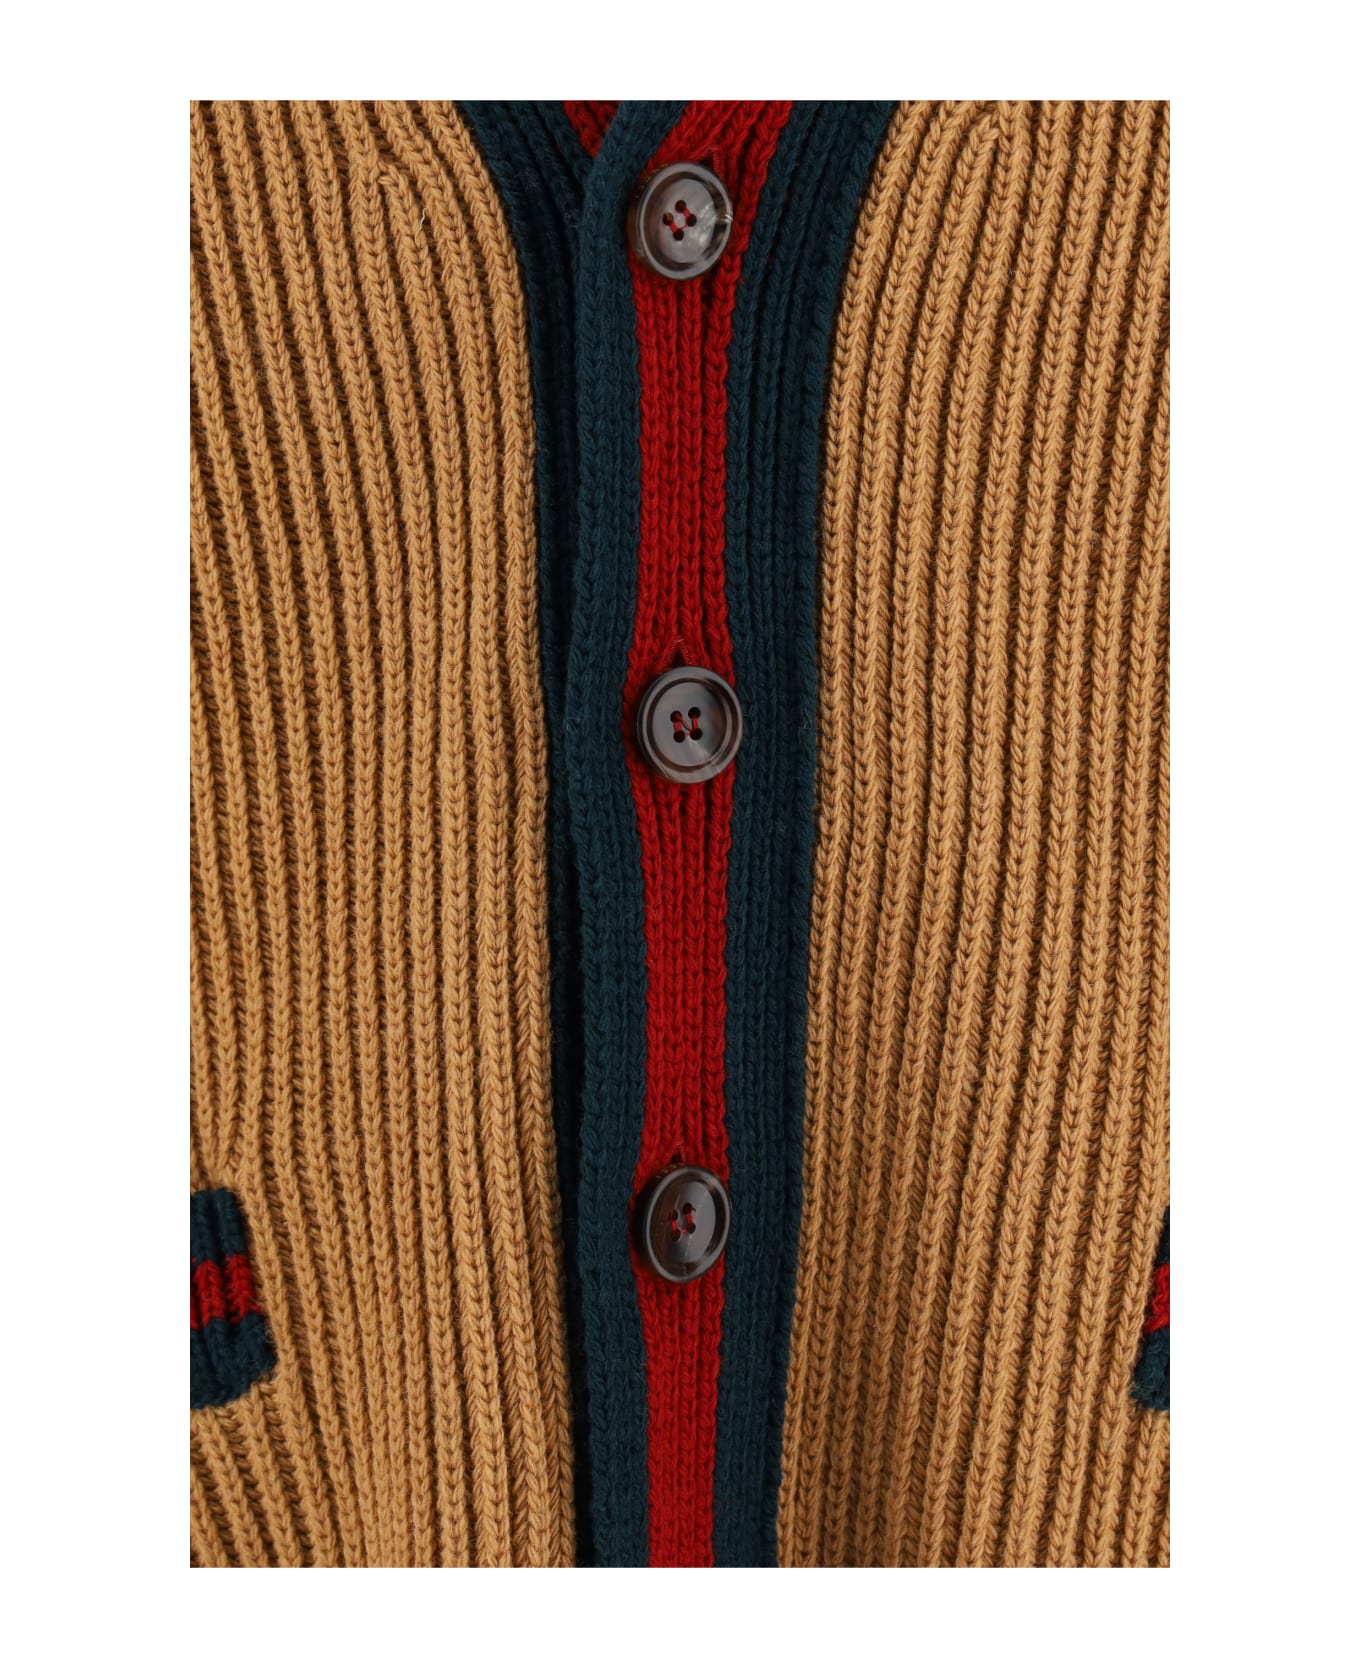 Gucci Cardigan - Camel/green/red